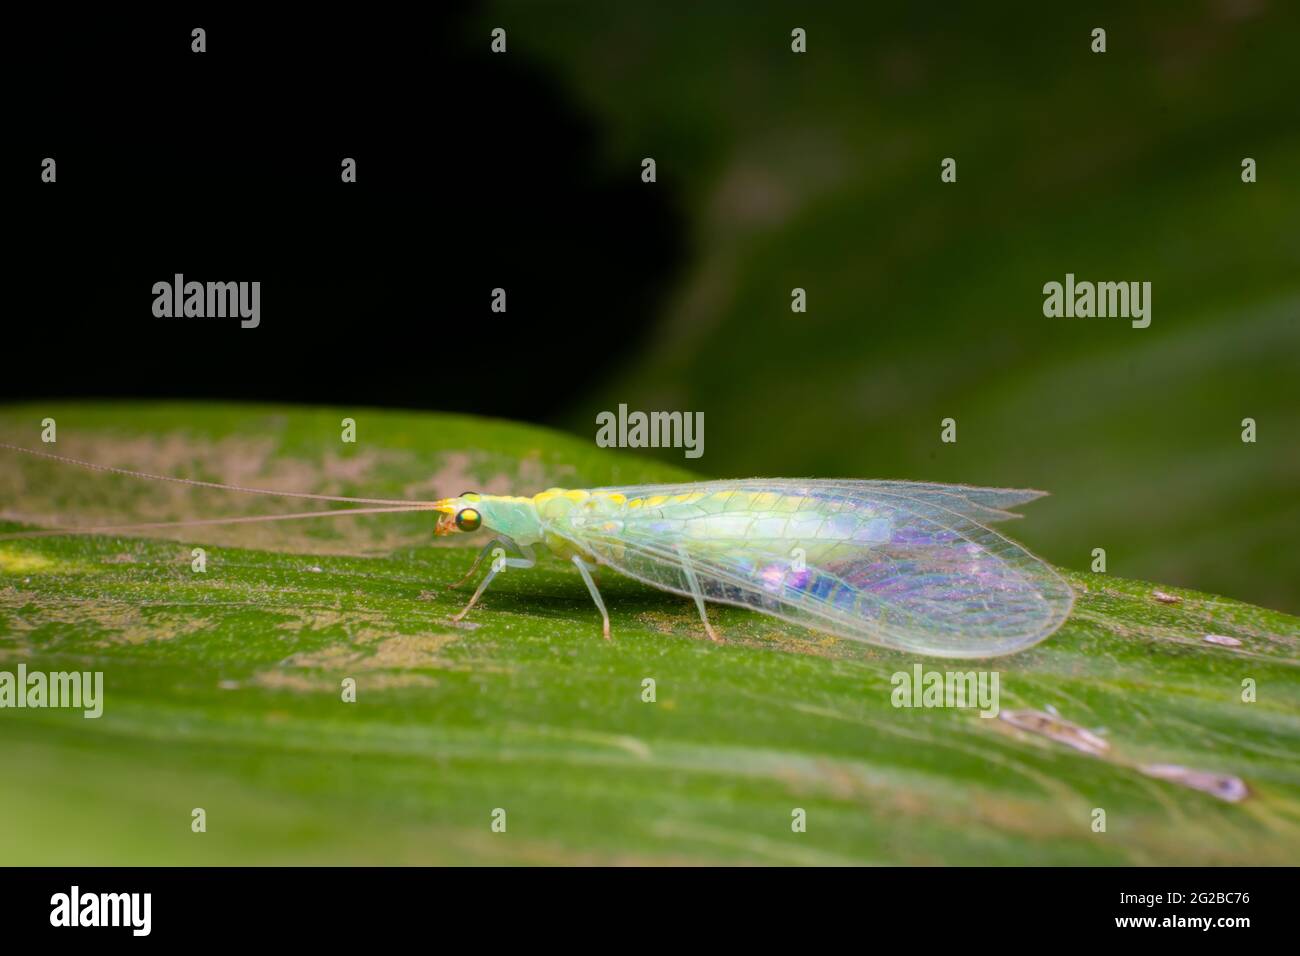 Green lacewing on the leaf. These insects are known as beneficial insects. Their larvae feed on soft-bodied insects like aphids. Stock Photo